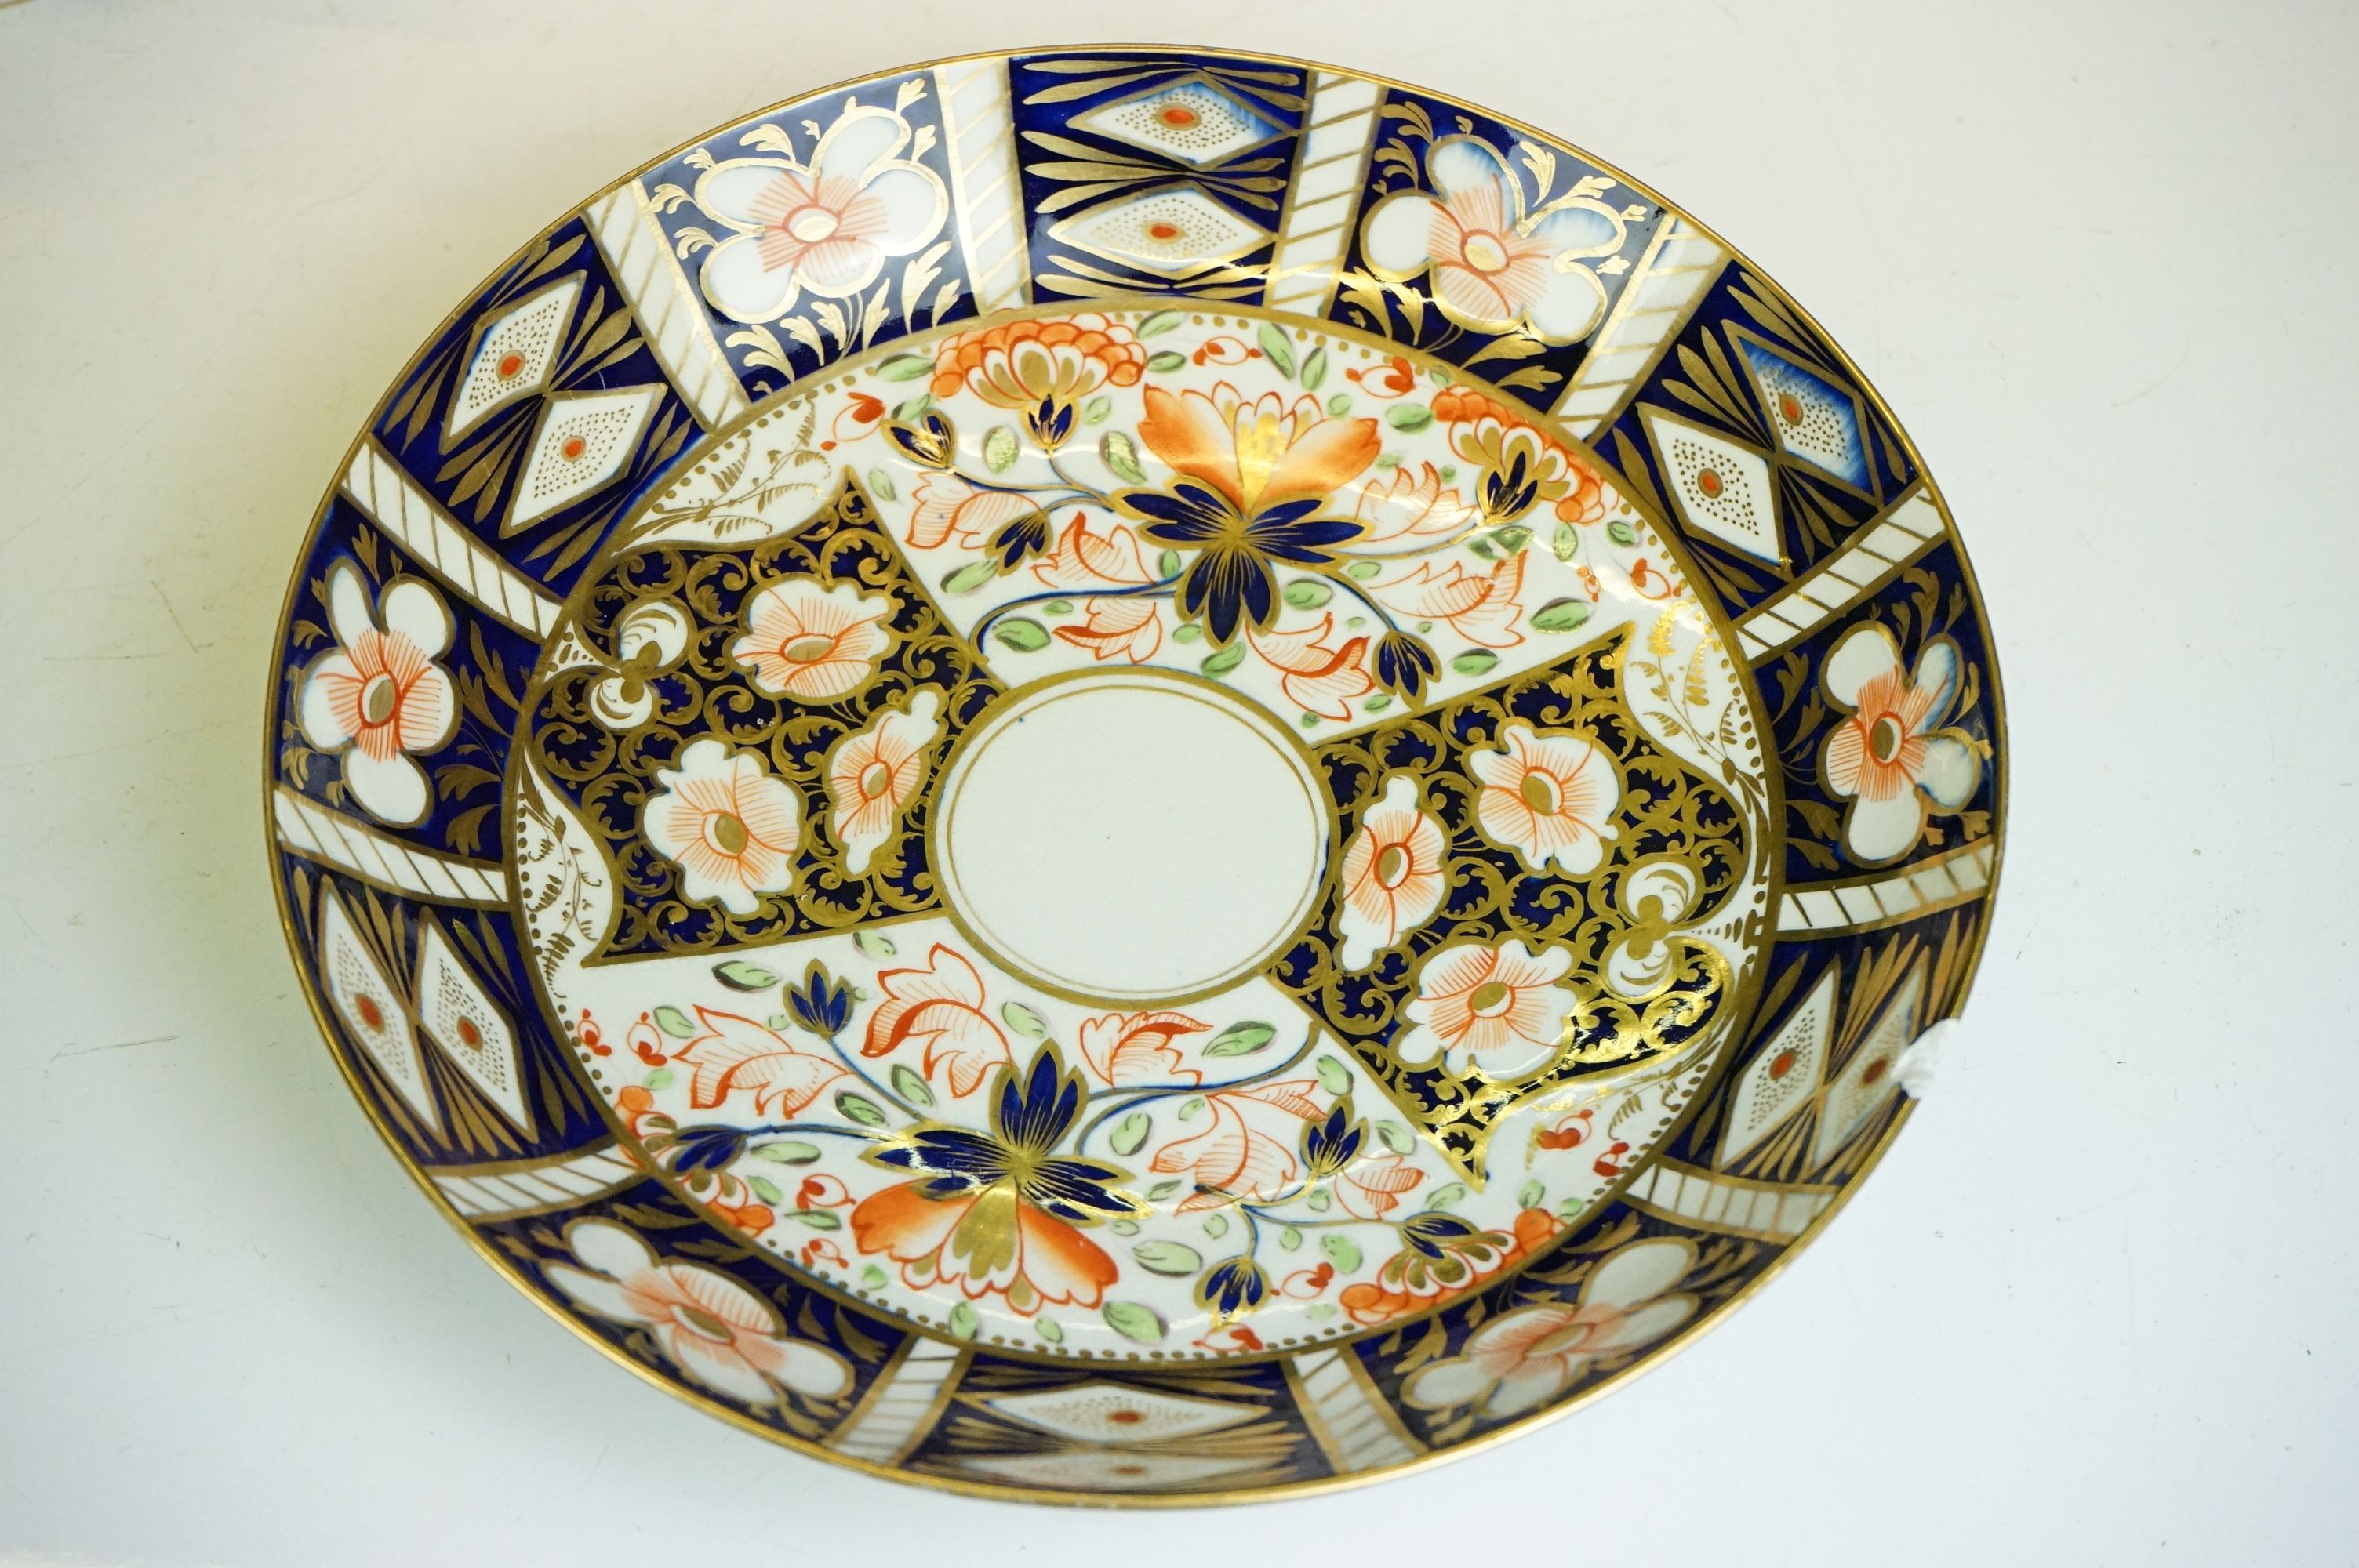 Early 19th century Crown Derby Imari pattern ceramics to include a small tureen & cover, teacups, - Image 6 of 24